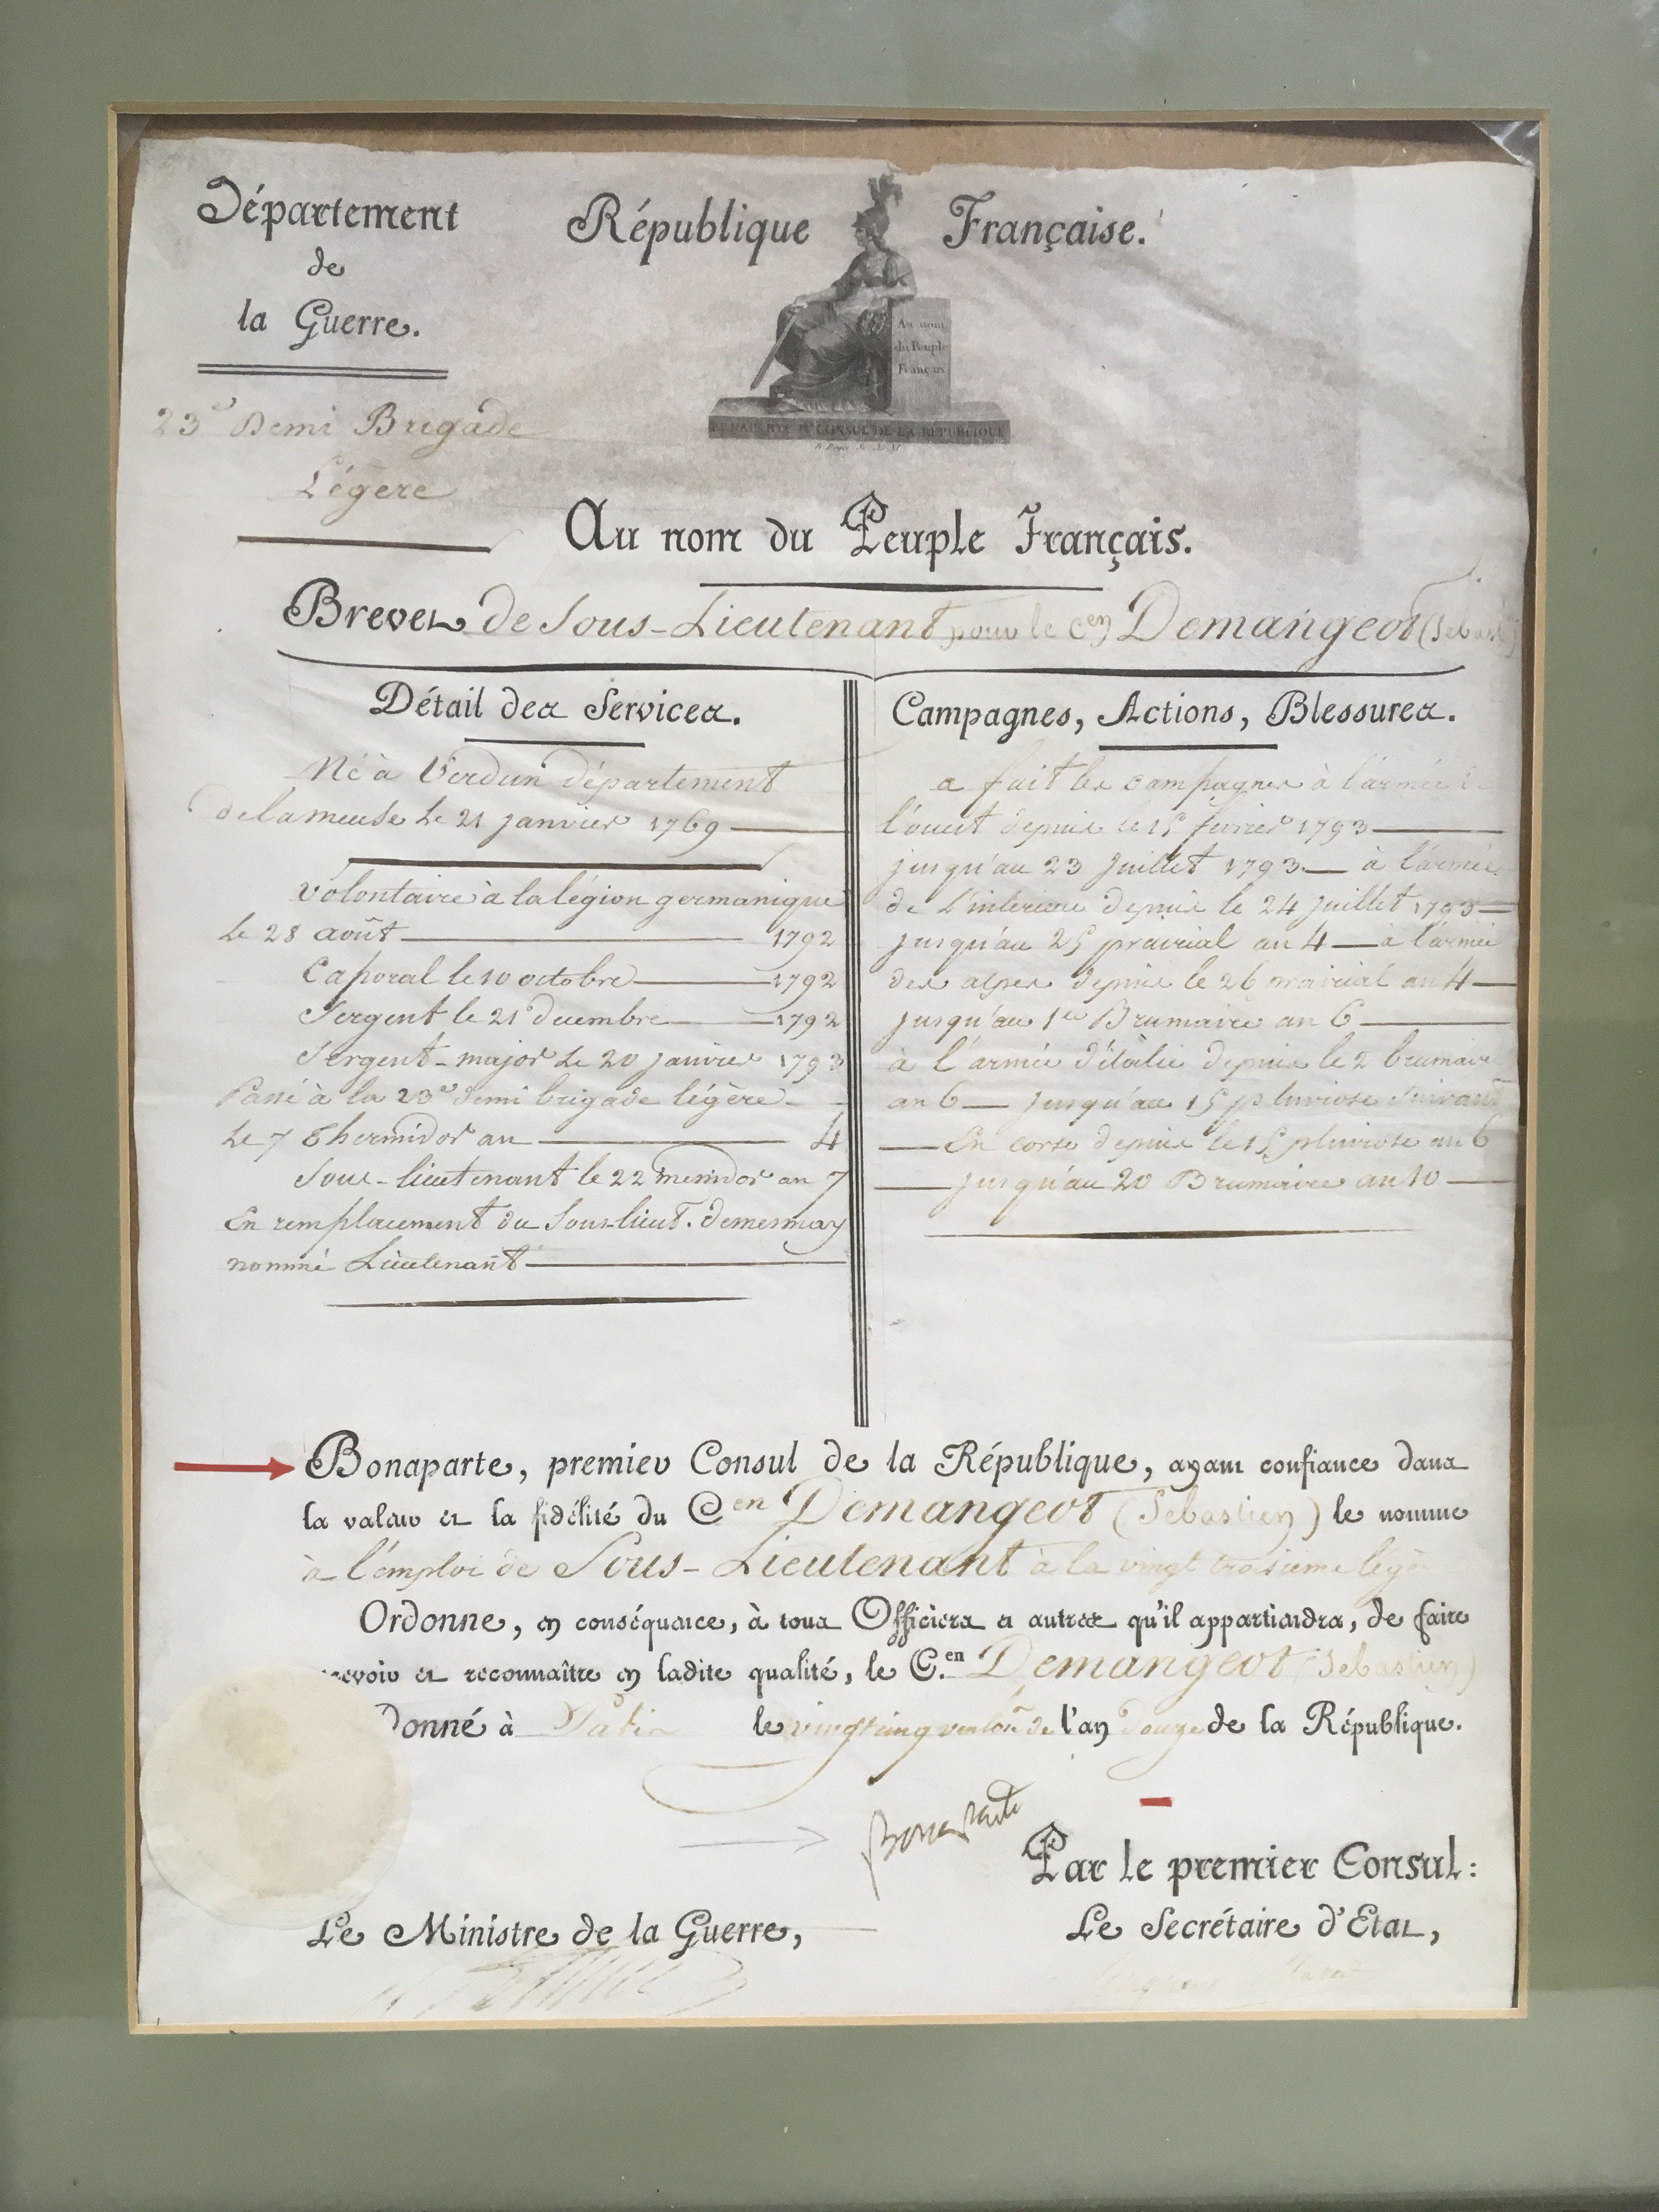 A framed French soldier's CV believed to be bearin